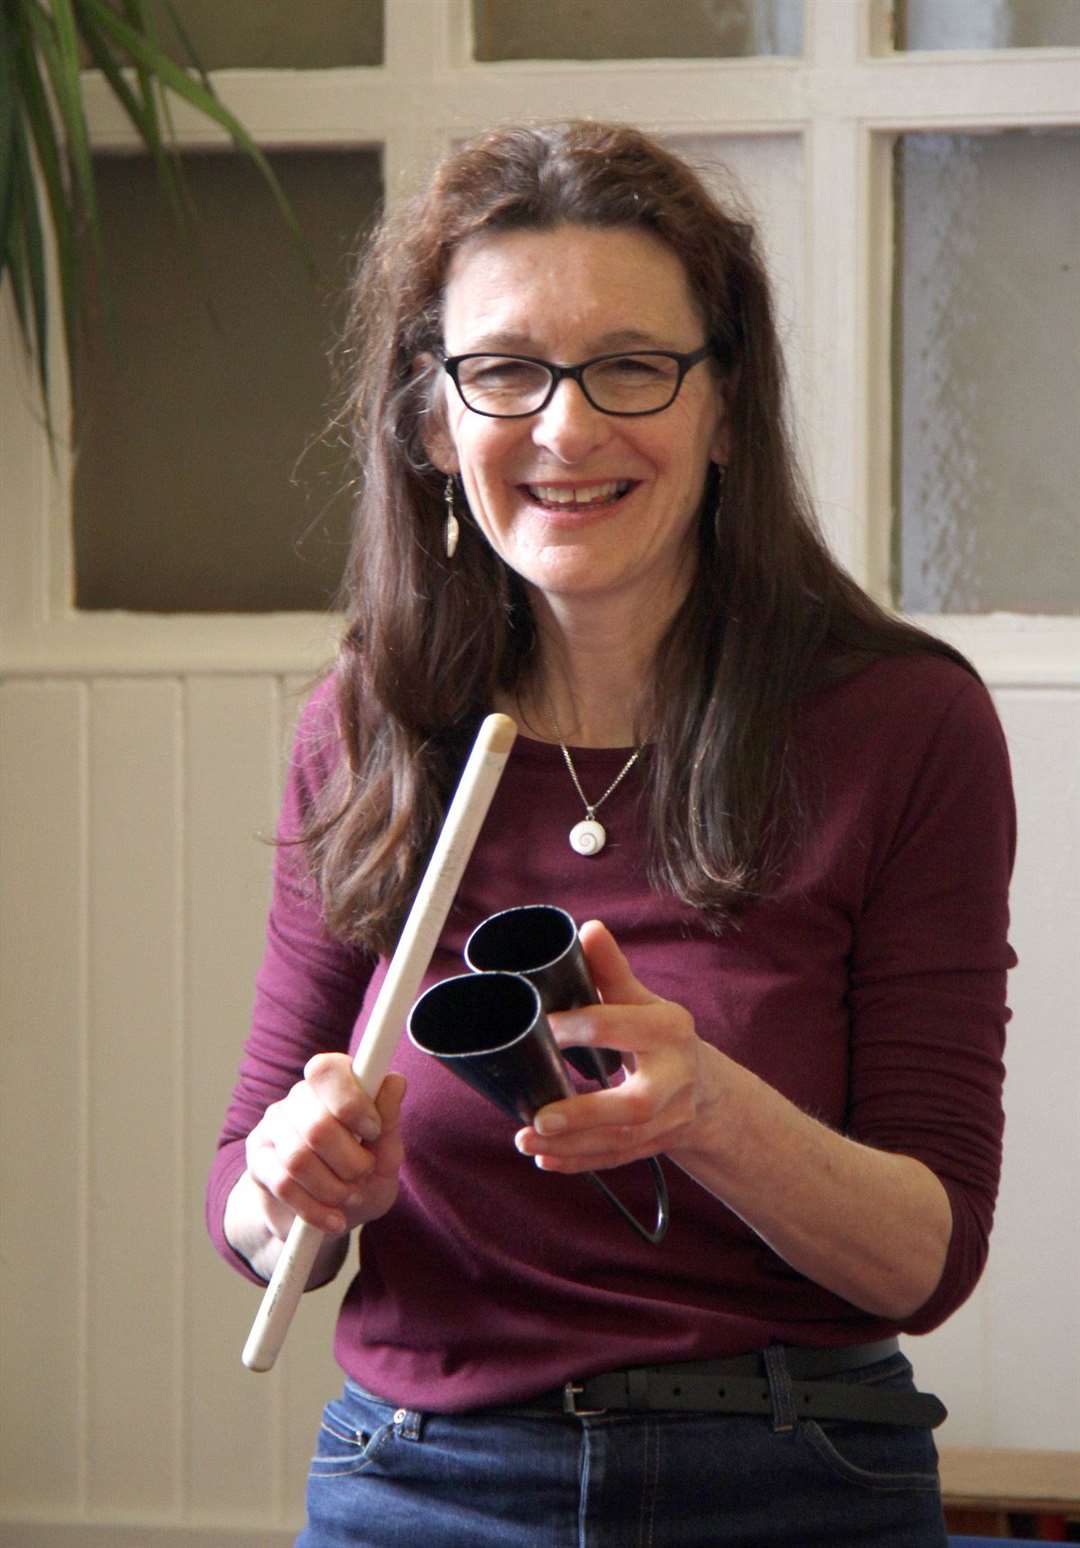 As well as being a storyteller Carol Scorer runs world drumming classes in Forres.